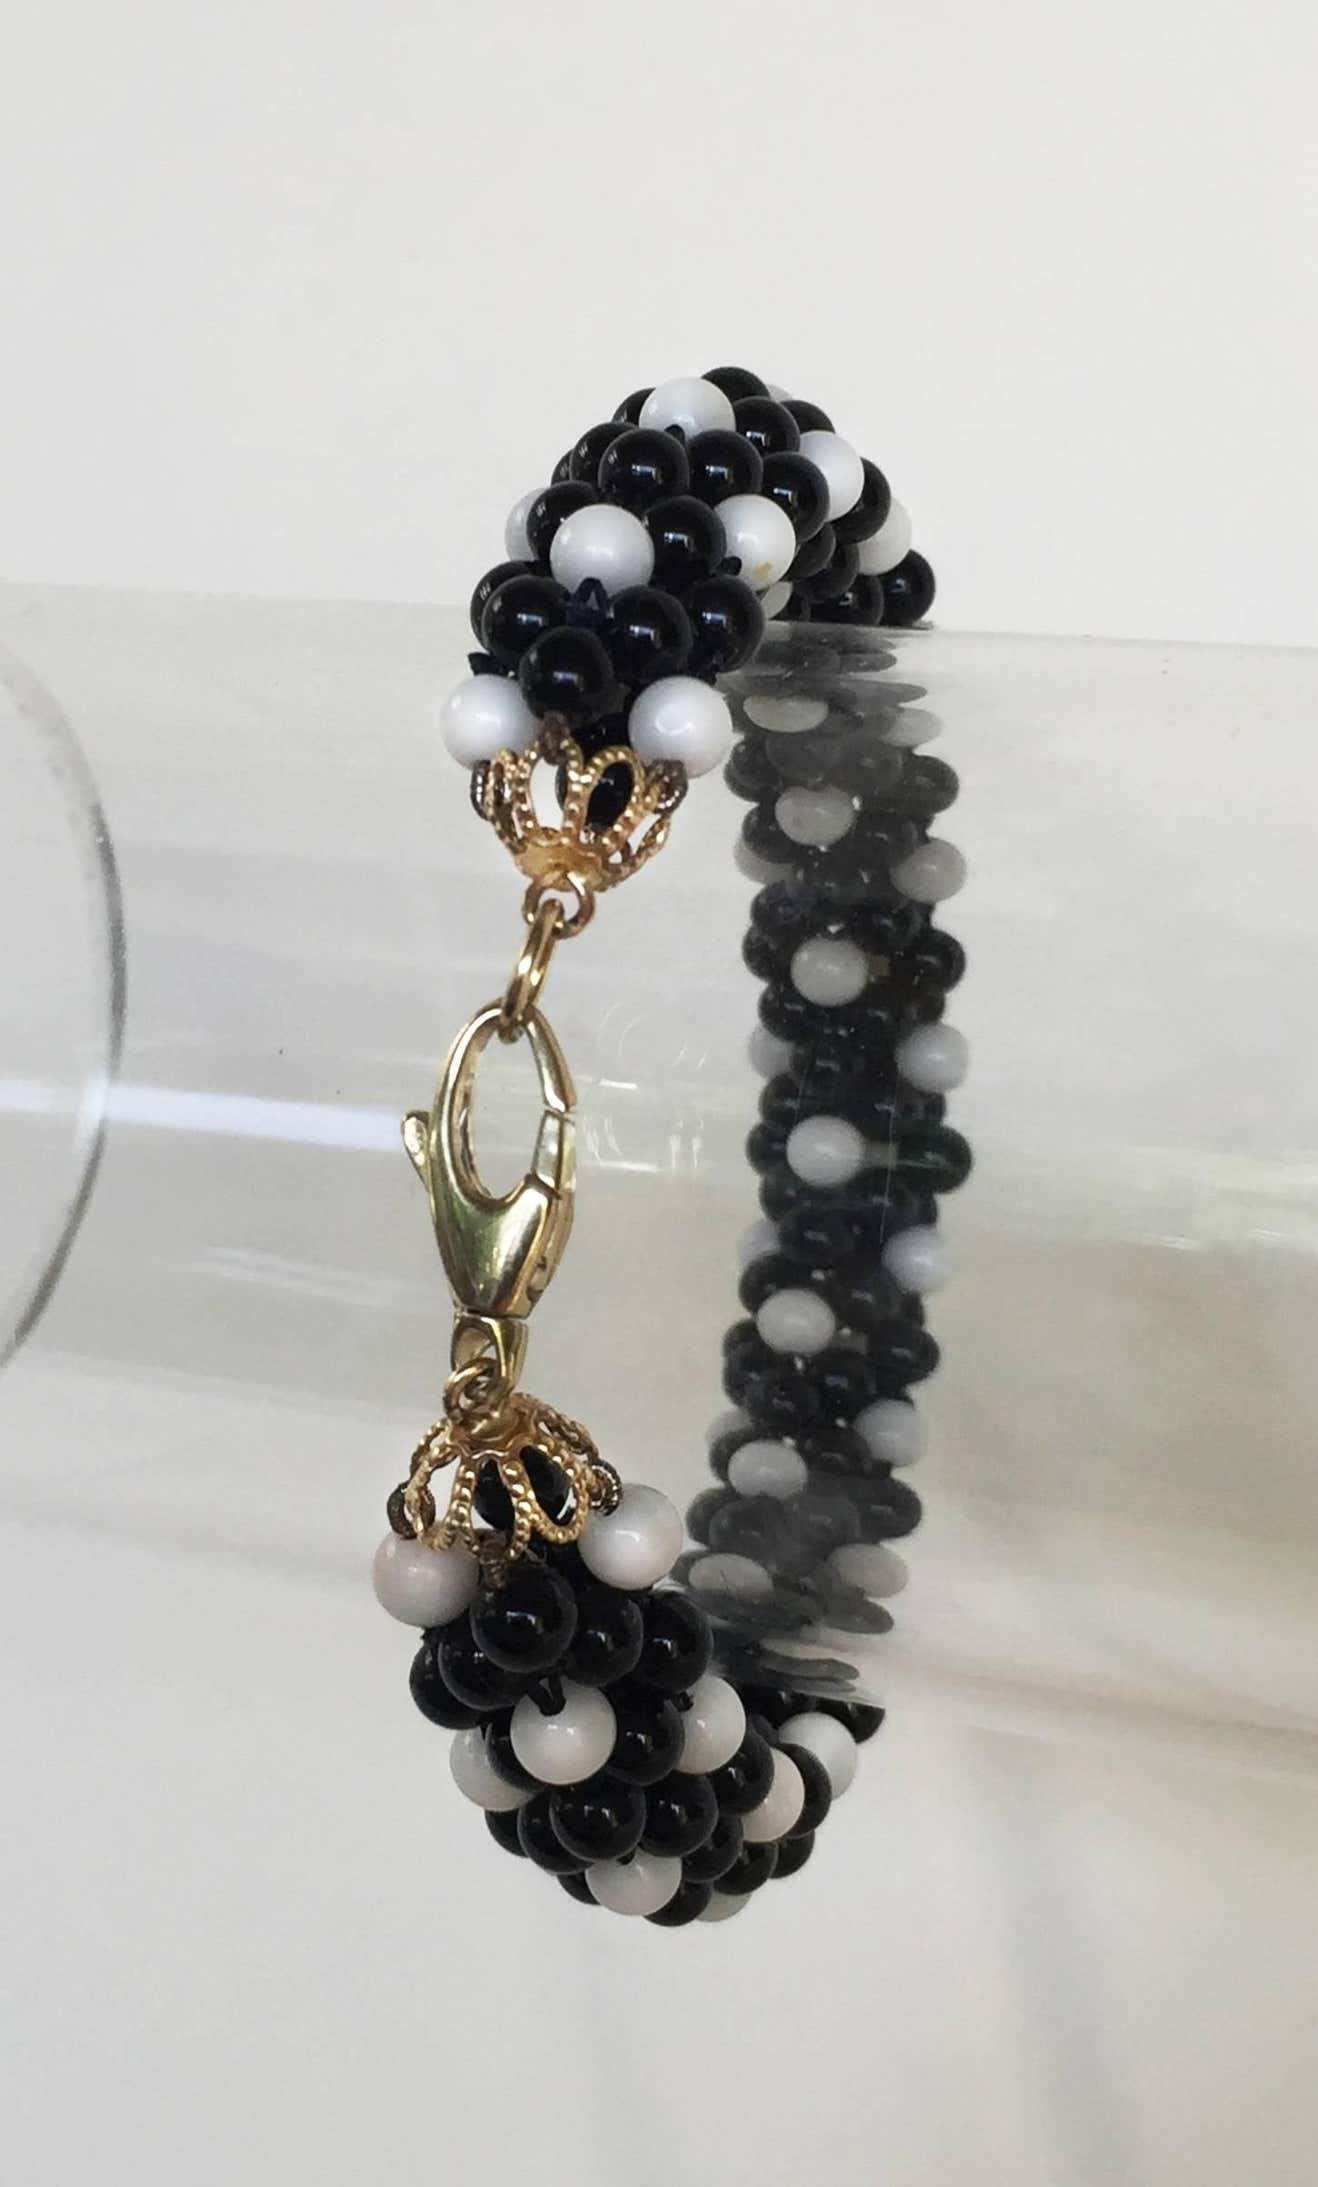 Onyx and White Coral and 14 Karat Yellow Gold Clasp Rope Bracelet